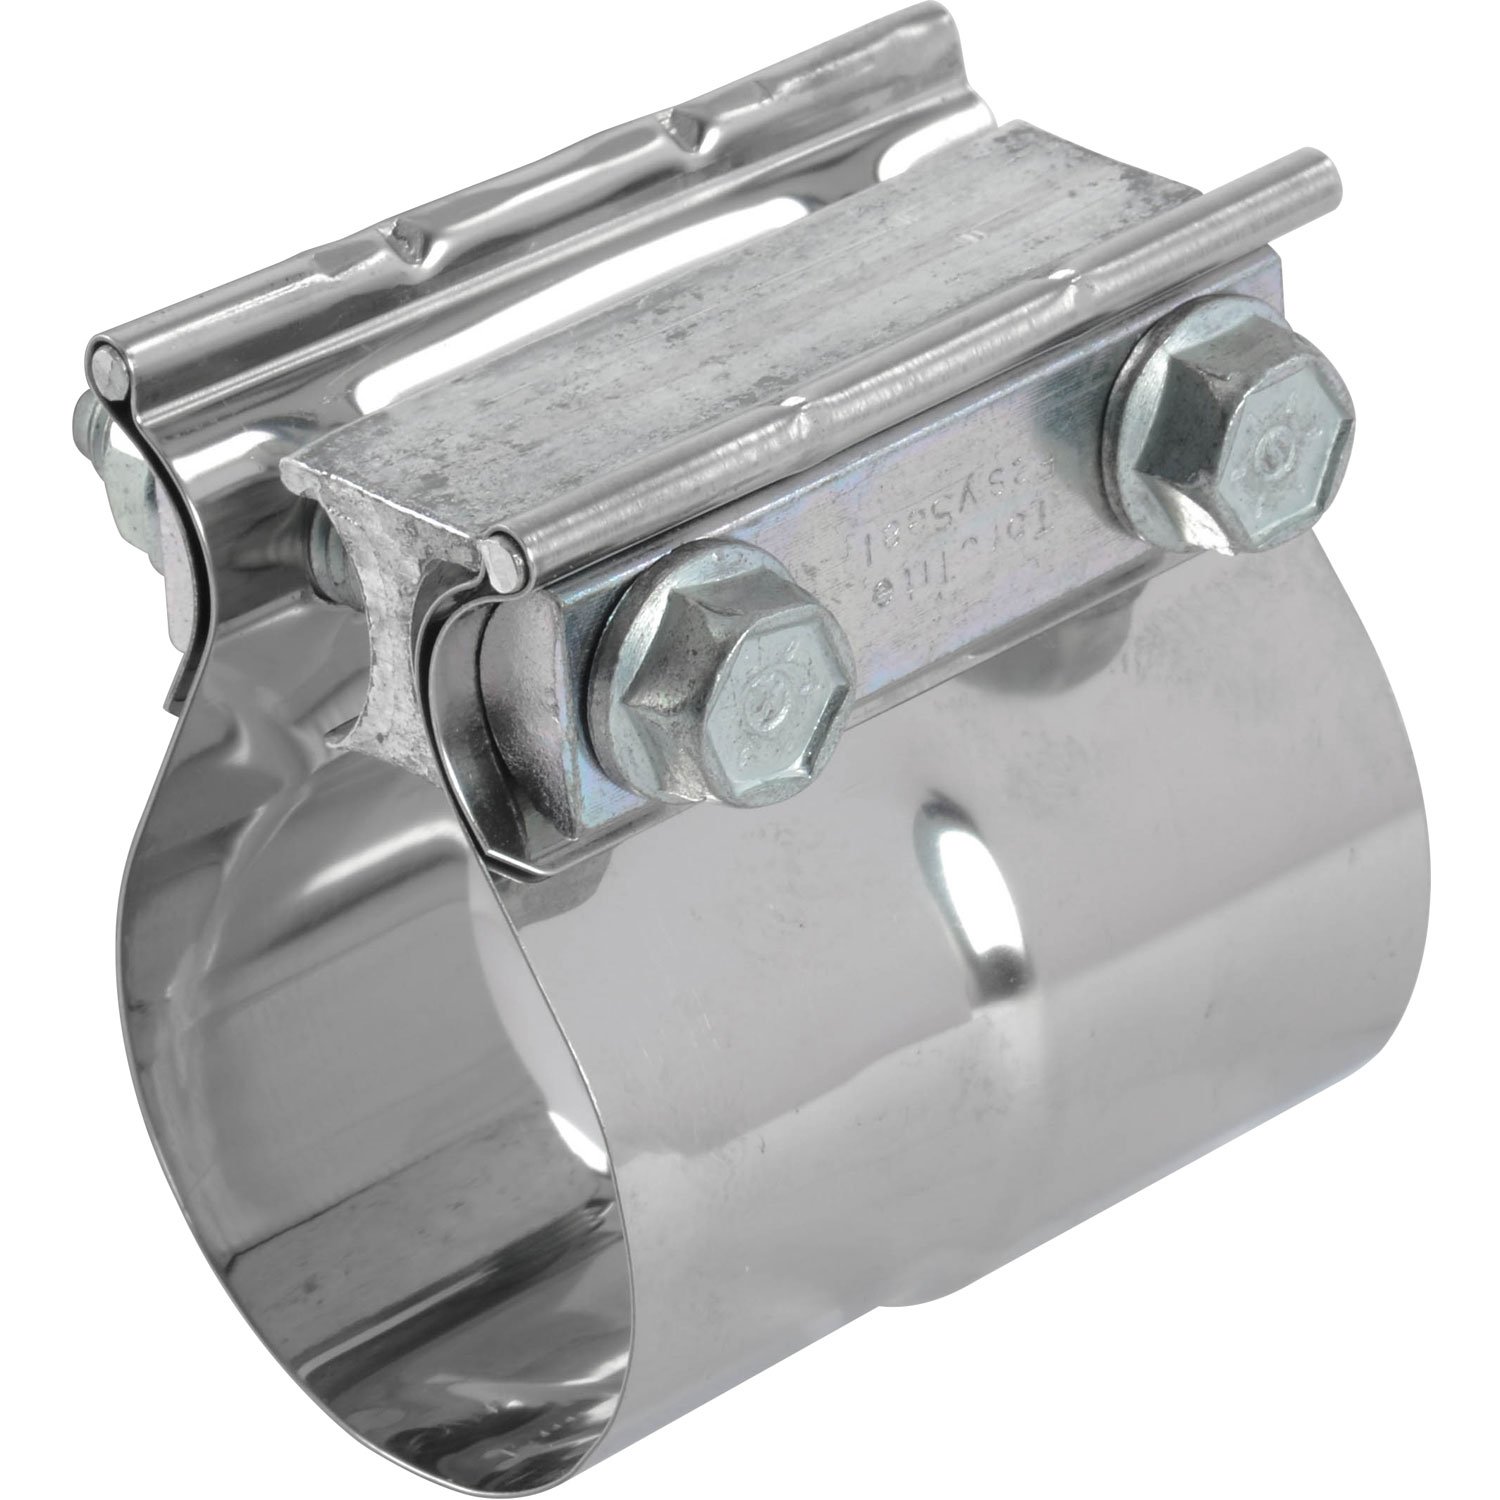 Preformed Exhaust Lap Joint Band Clamp for I.D. O.D. Slip Fit Connection [Fits 2 in. O.D. Pipe]